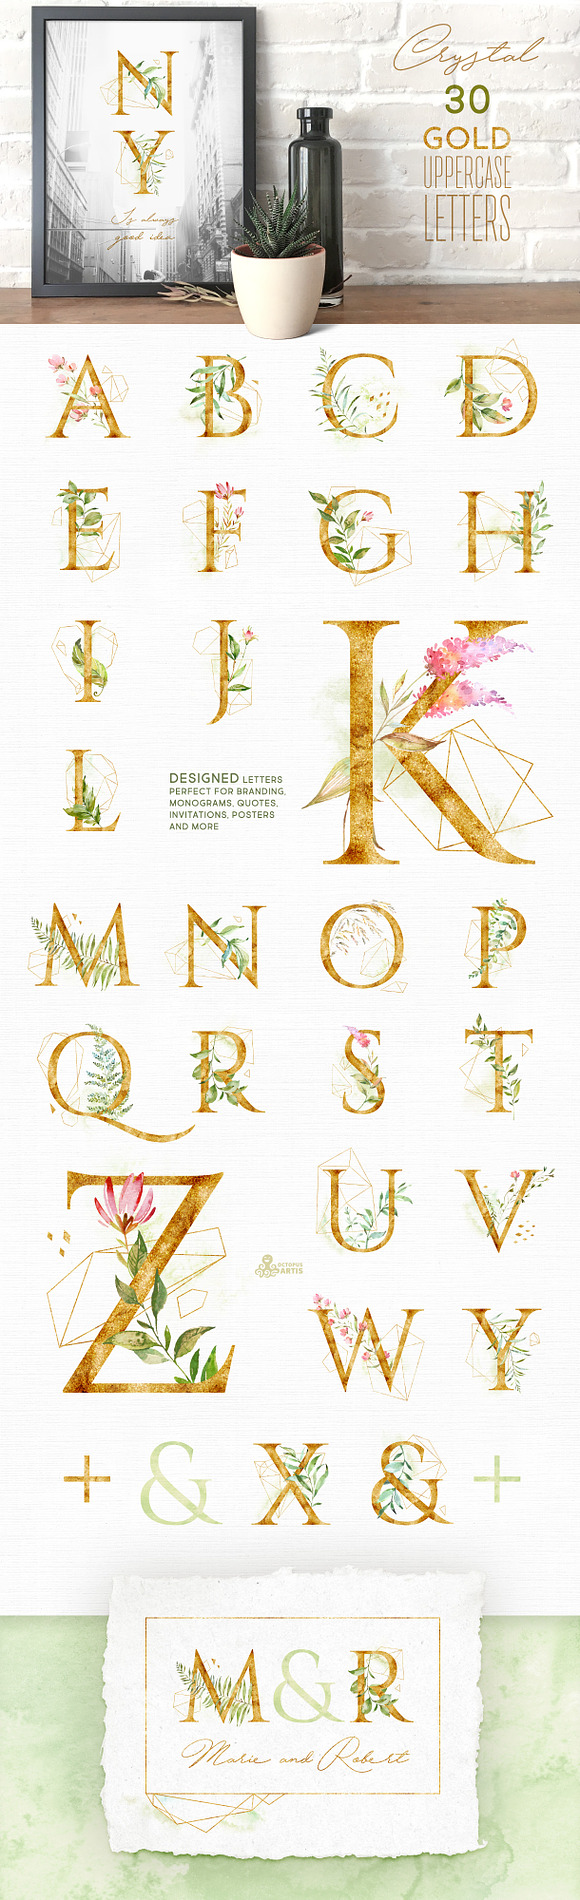 Crystal. Floral & Polygonal Bundle in Illustrations - product preview 2